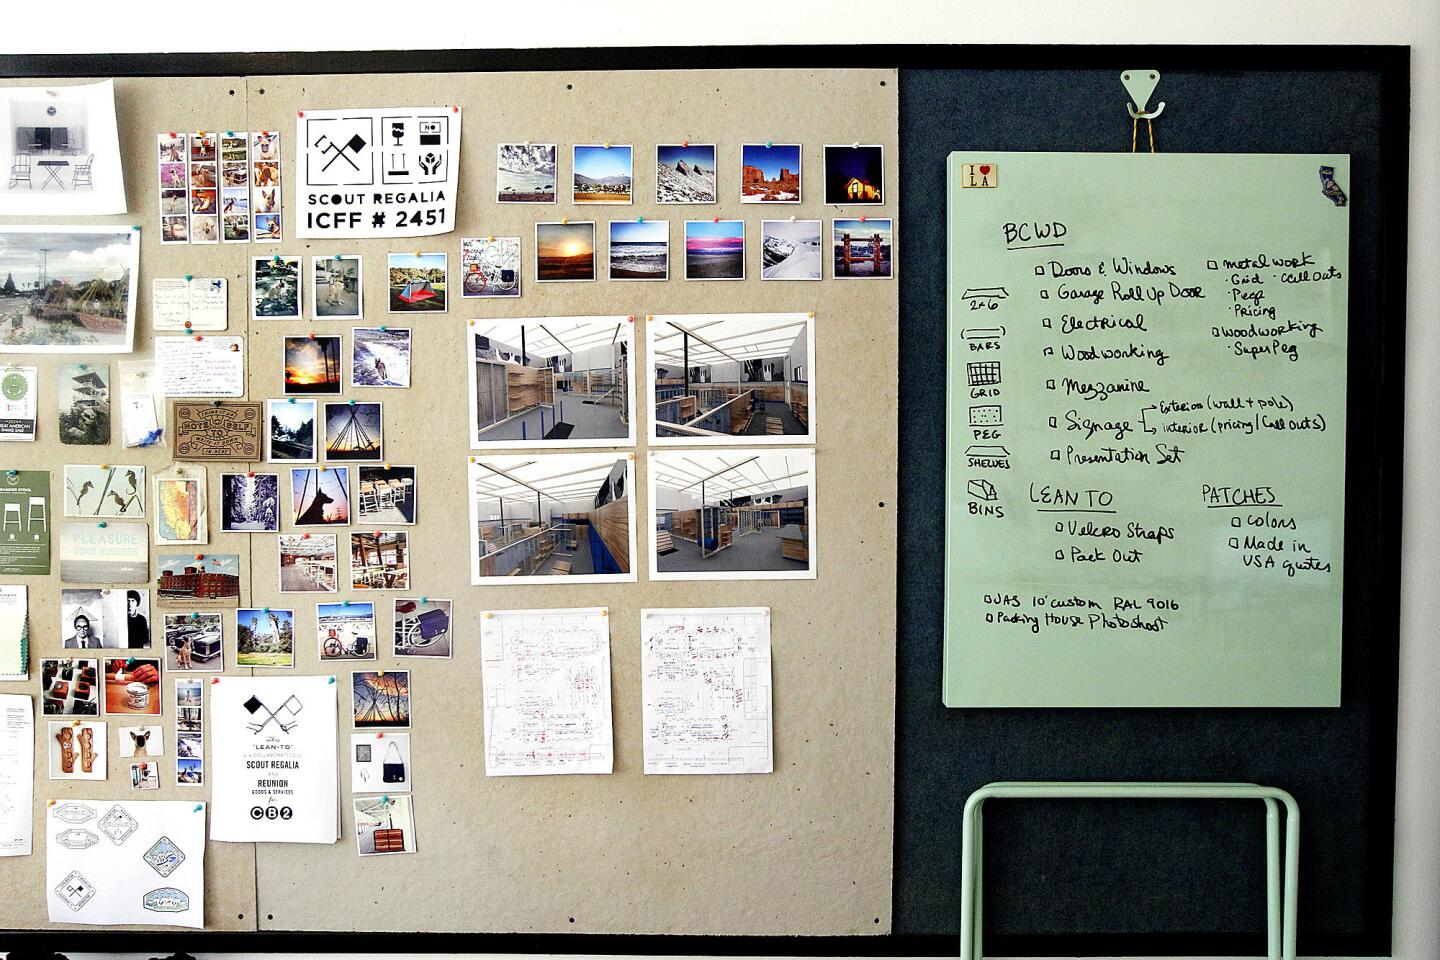 An inspiration board, left, hangs next to the SR Foldable Table at Scout Regalia headquarters in Glassell Park. The table top can be detached, hung on the wall and used as a magnetic dry erase board.